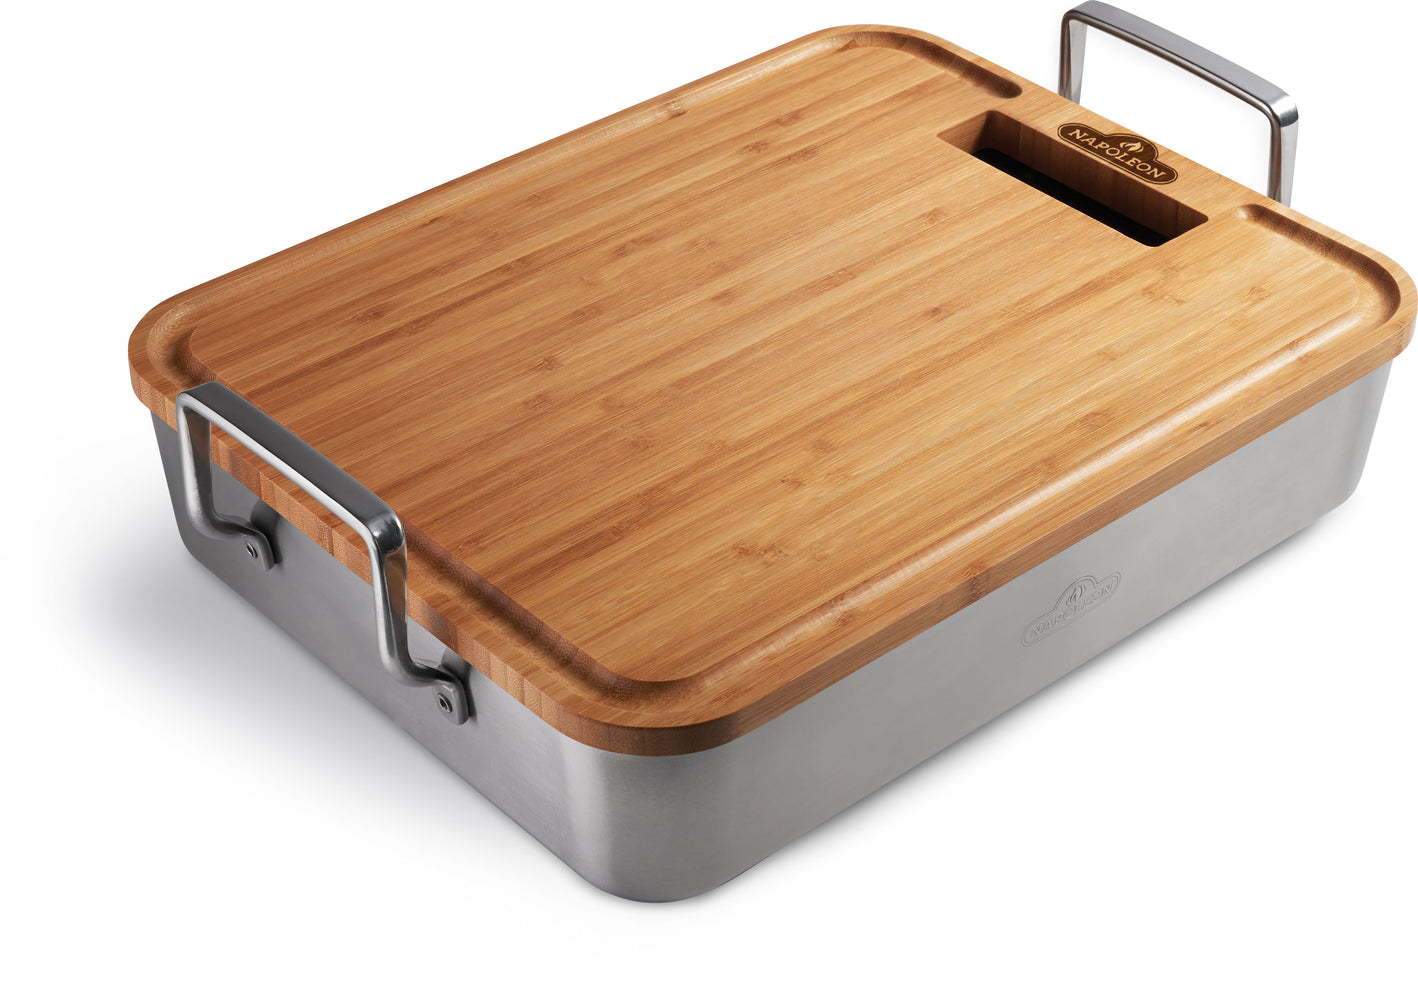 Premium Stainless Steel Roasting Pan with Bamboo Cutting Board